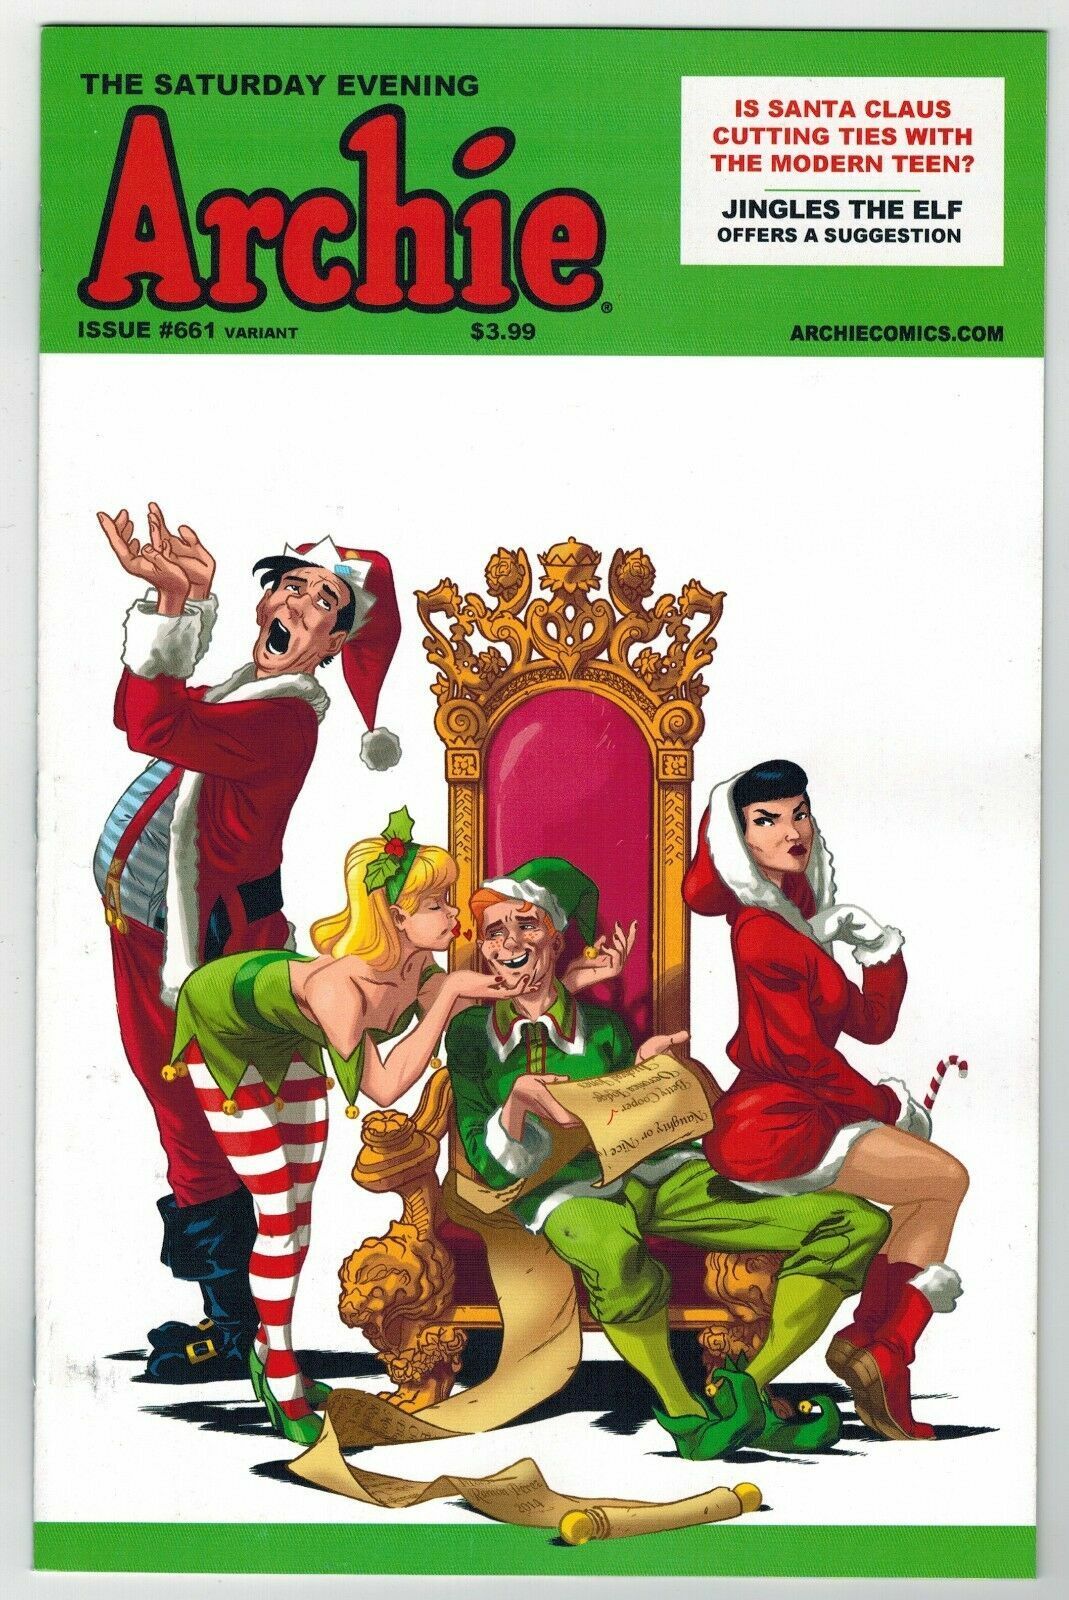 ARCHIE #661 HOLLY JOLLY VARIANT COVER - 2014 COMIC BOOK NM